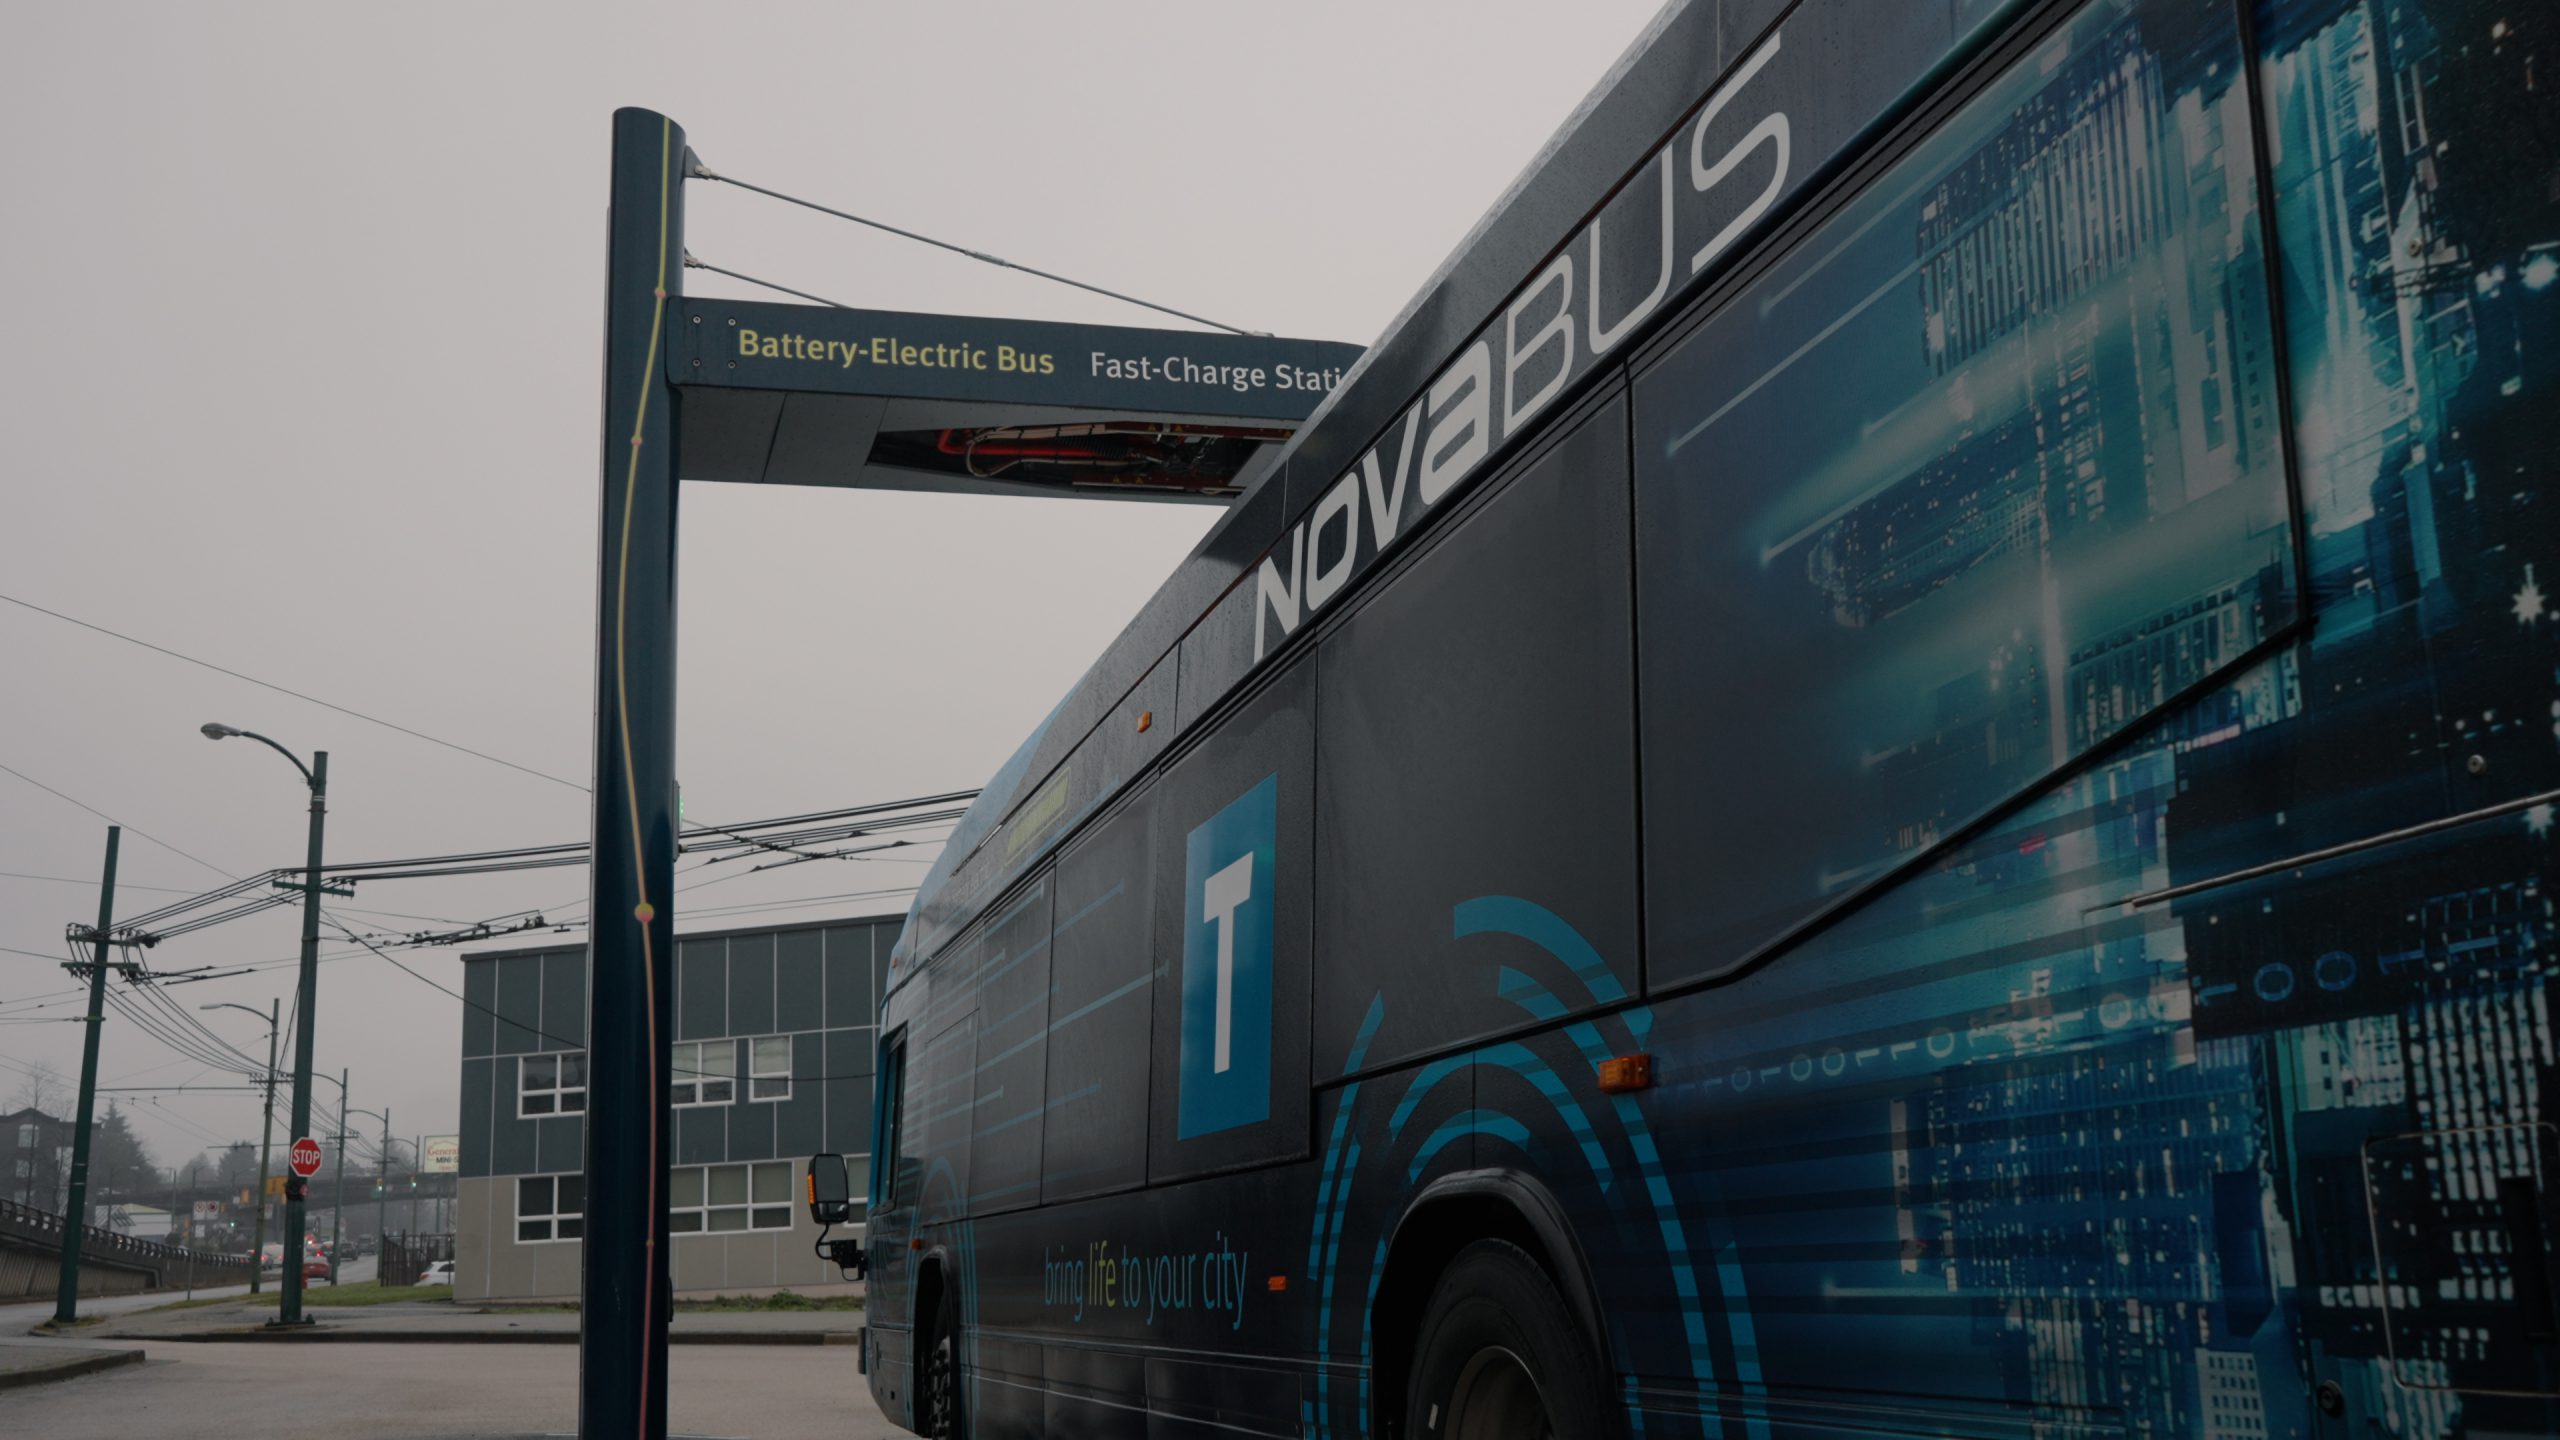 TransLink tests a demo battery-electric bus from Nova Bus at the Marpole fast-charge station